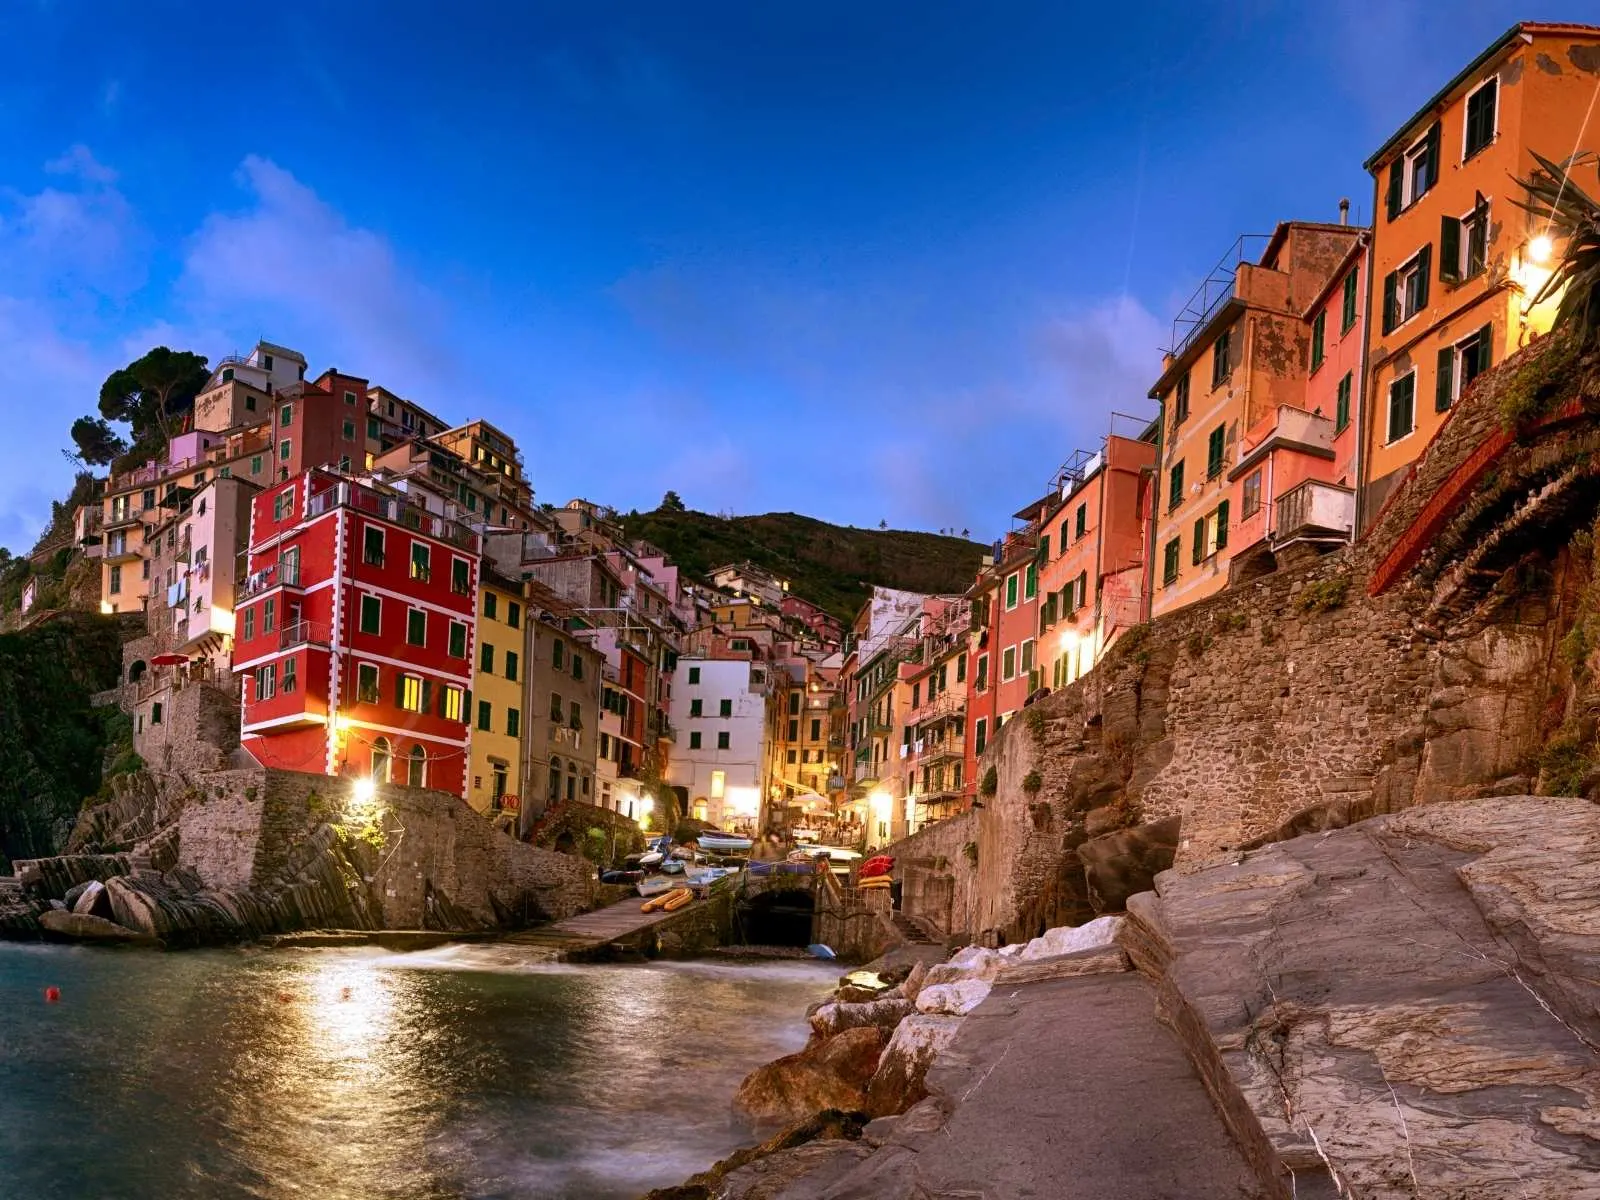 one of the Cinque Terre villages